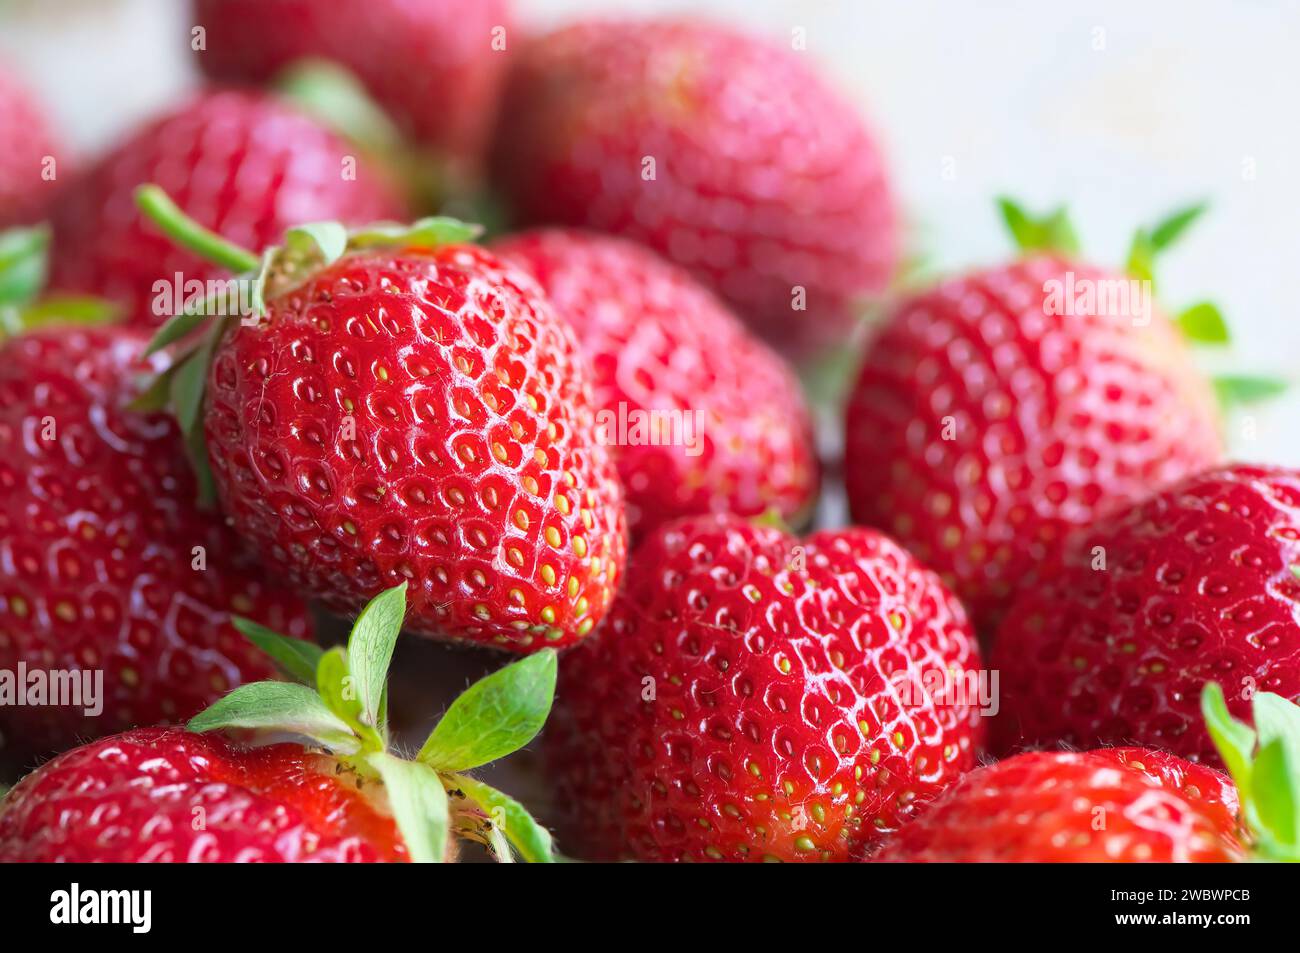 Strawberries (Fragaria x ananassa) - closeup of whole berries with stems. Stock Photo